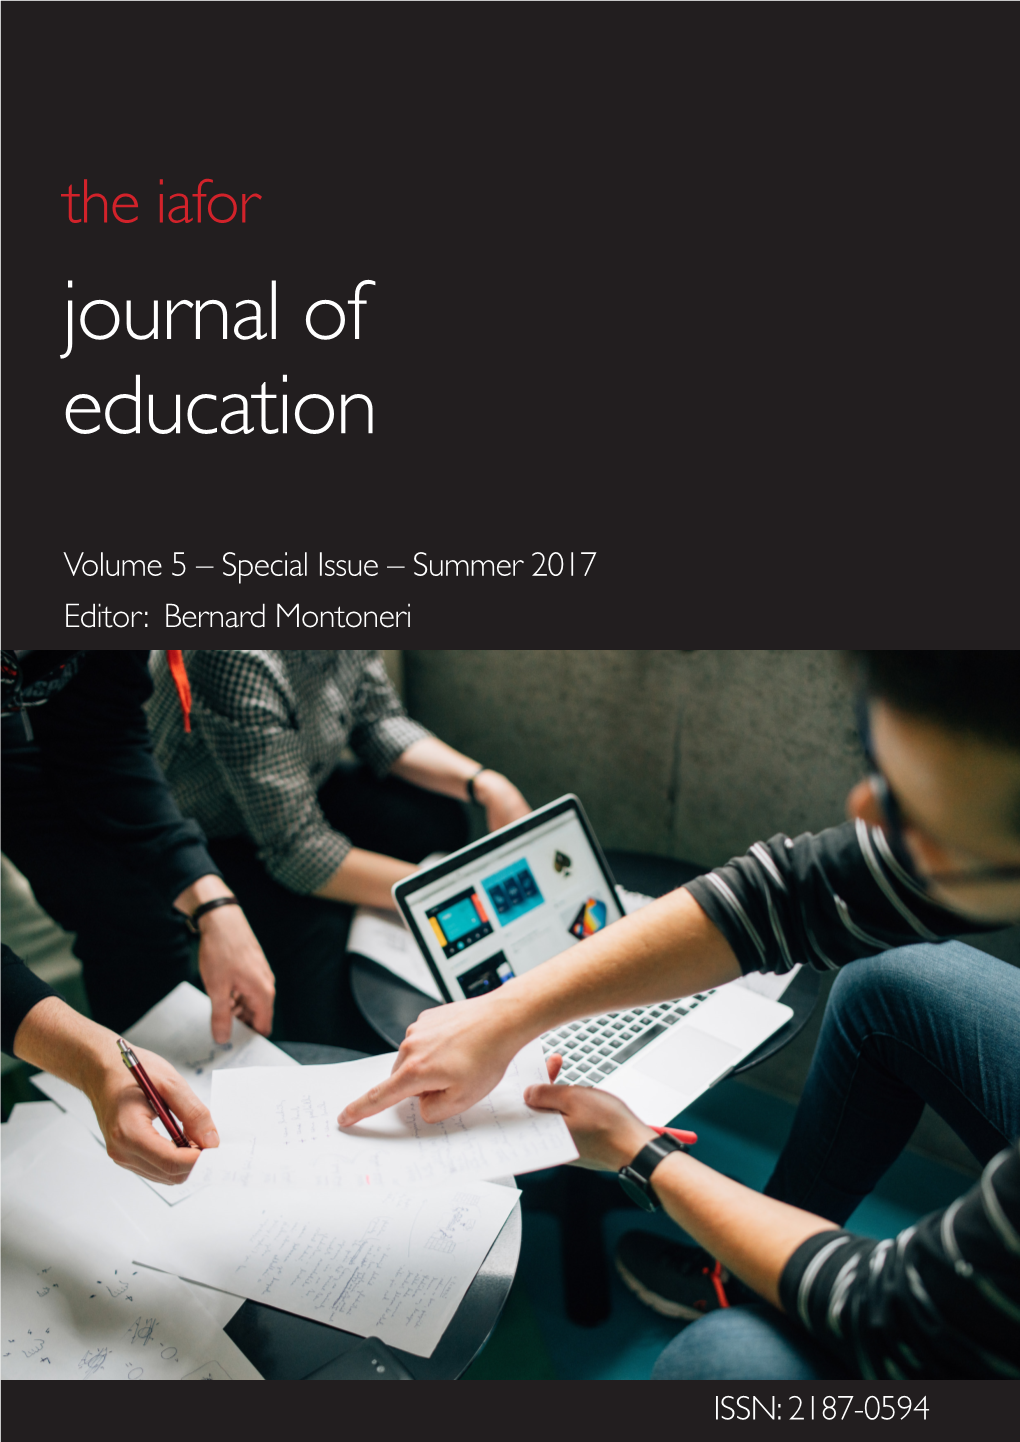 IAFOR Journal of Education Volume 5 Special Issue Summer 2017